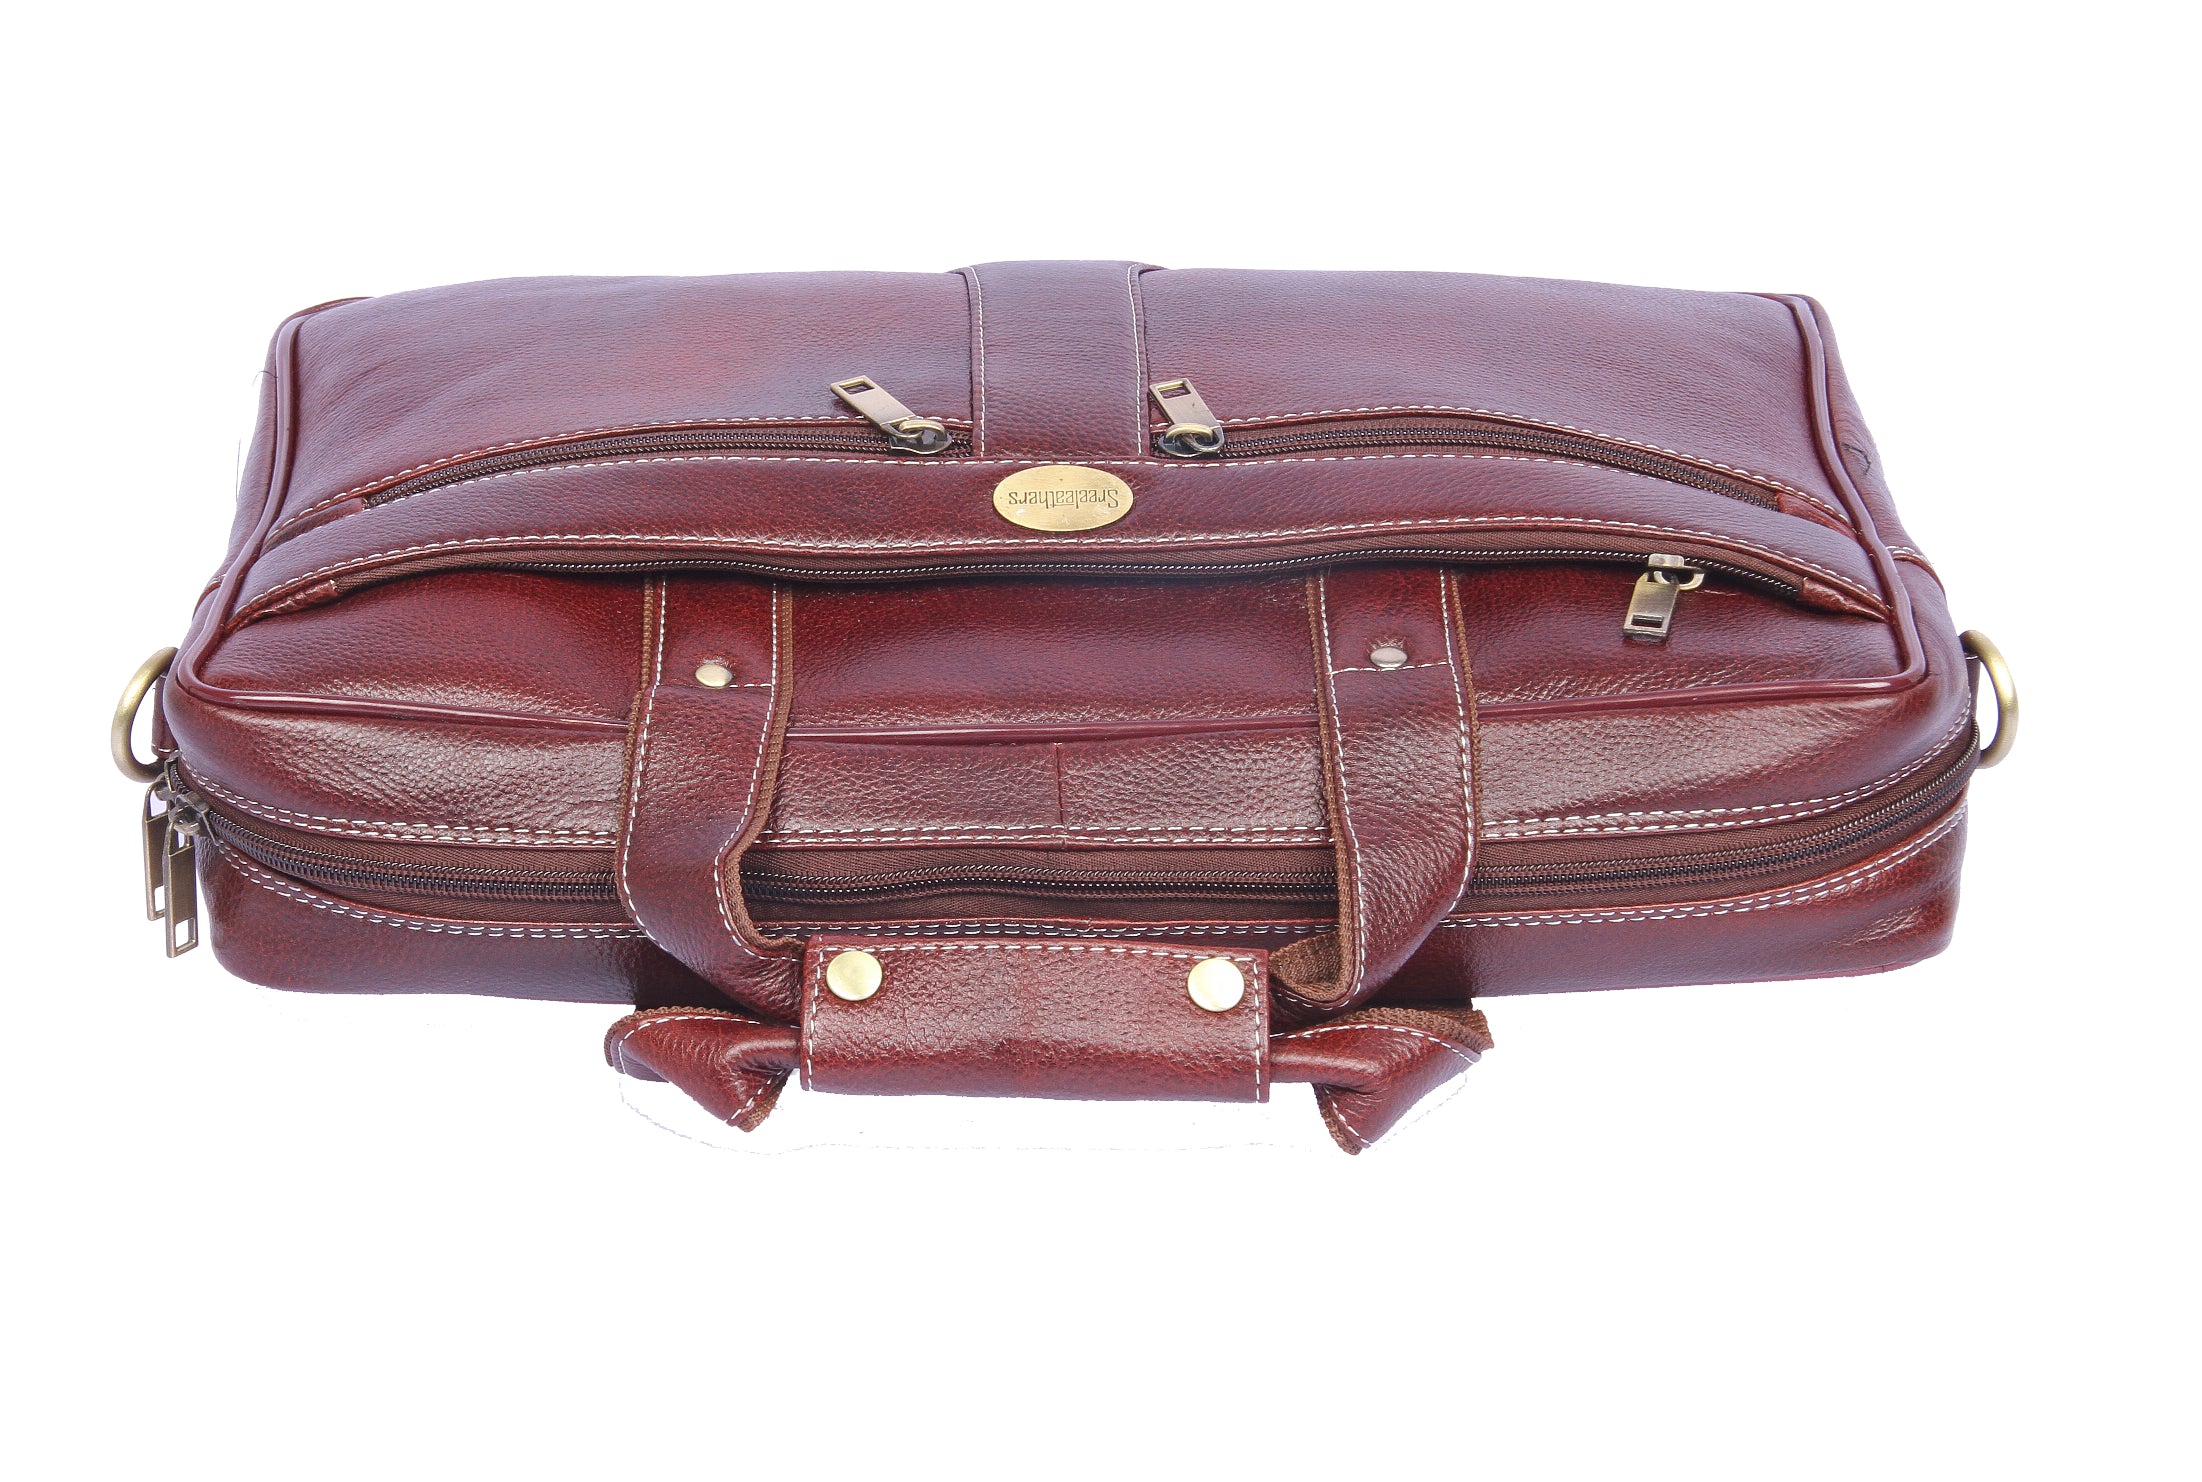 OFFICE BAG | NON LEATHER LAPTOP BAG FOR OFFICE USE. | By Sreeleathers  GurugramFacebook